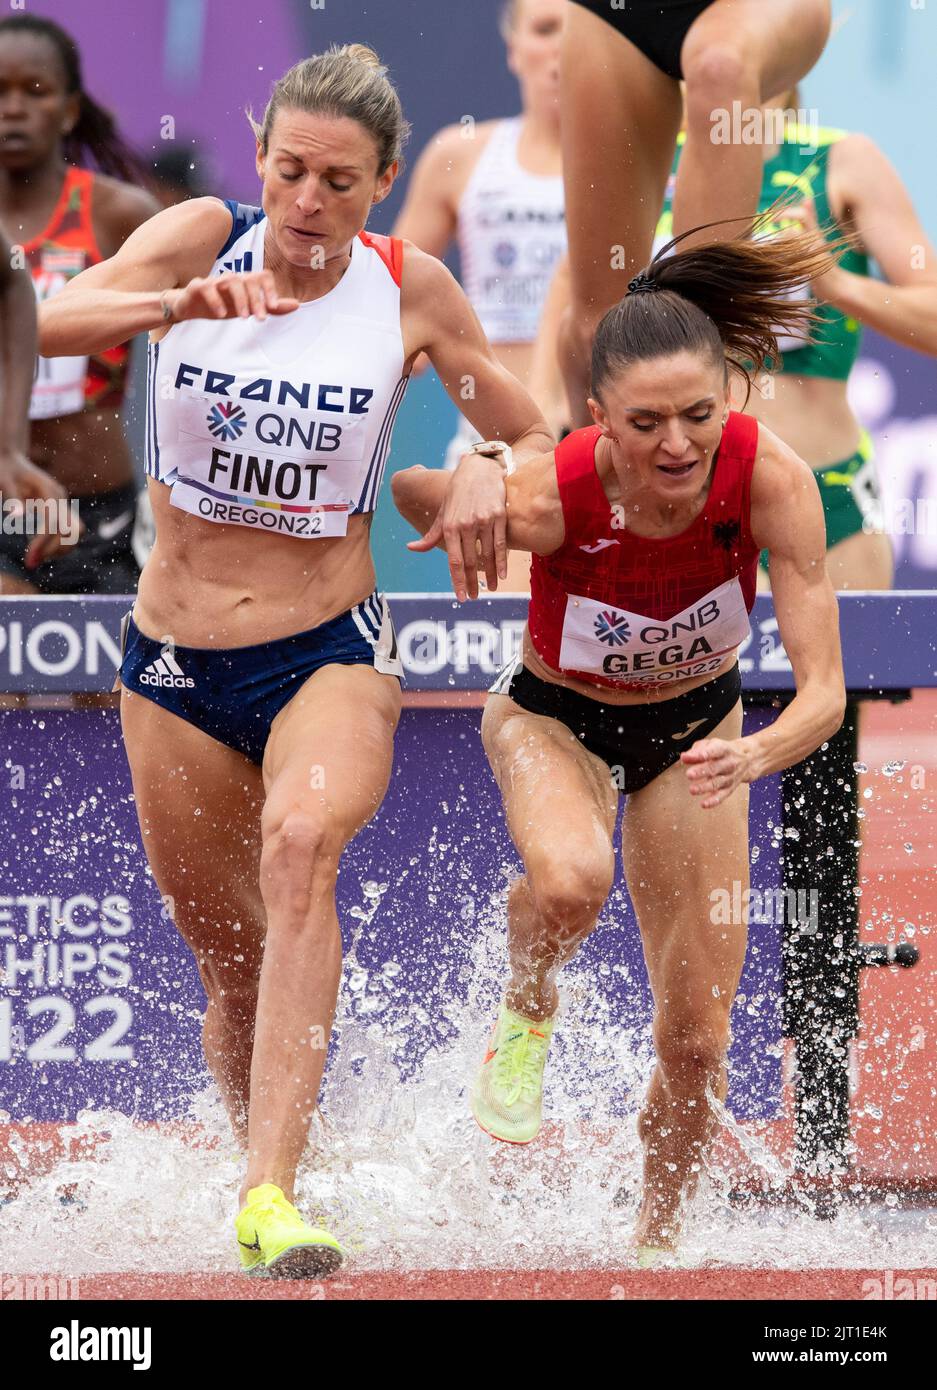 Alice Finot of France and Luiza Gega of Albania competing in the women’s 3000m steeplechase heats at the World Athletics Championships, Hayward Field, Stock Photo